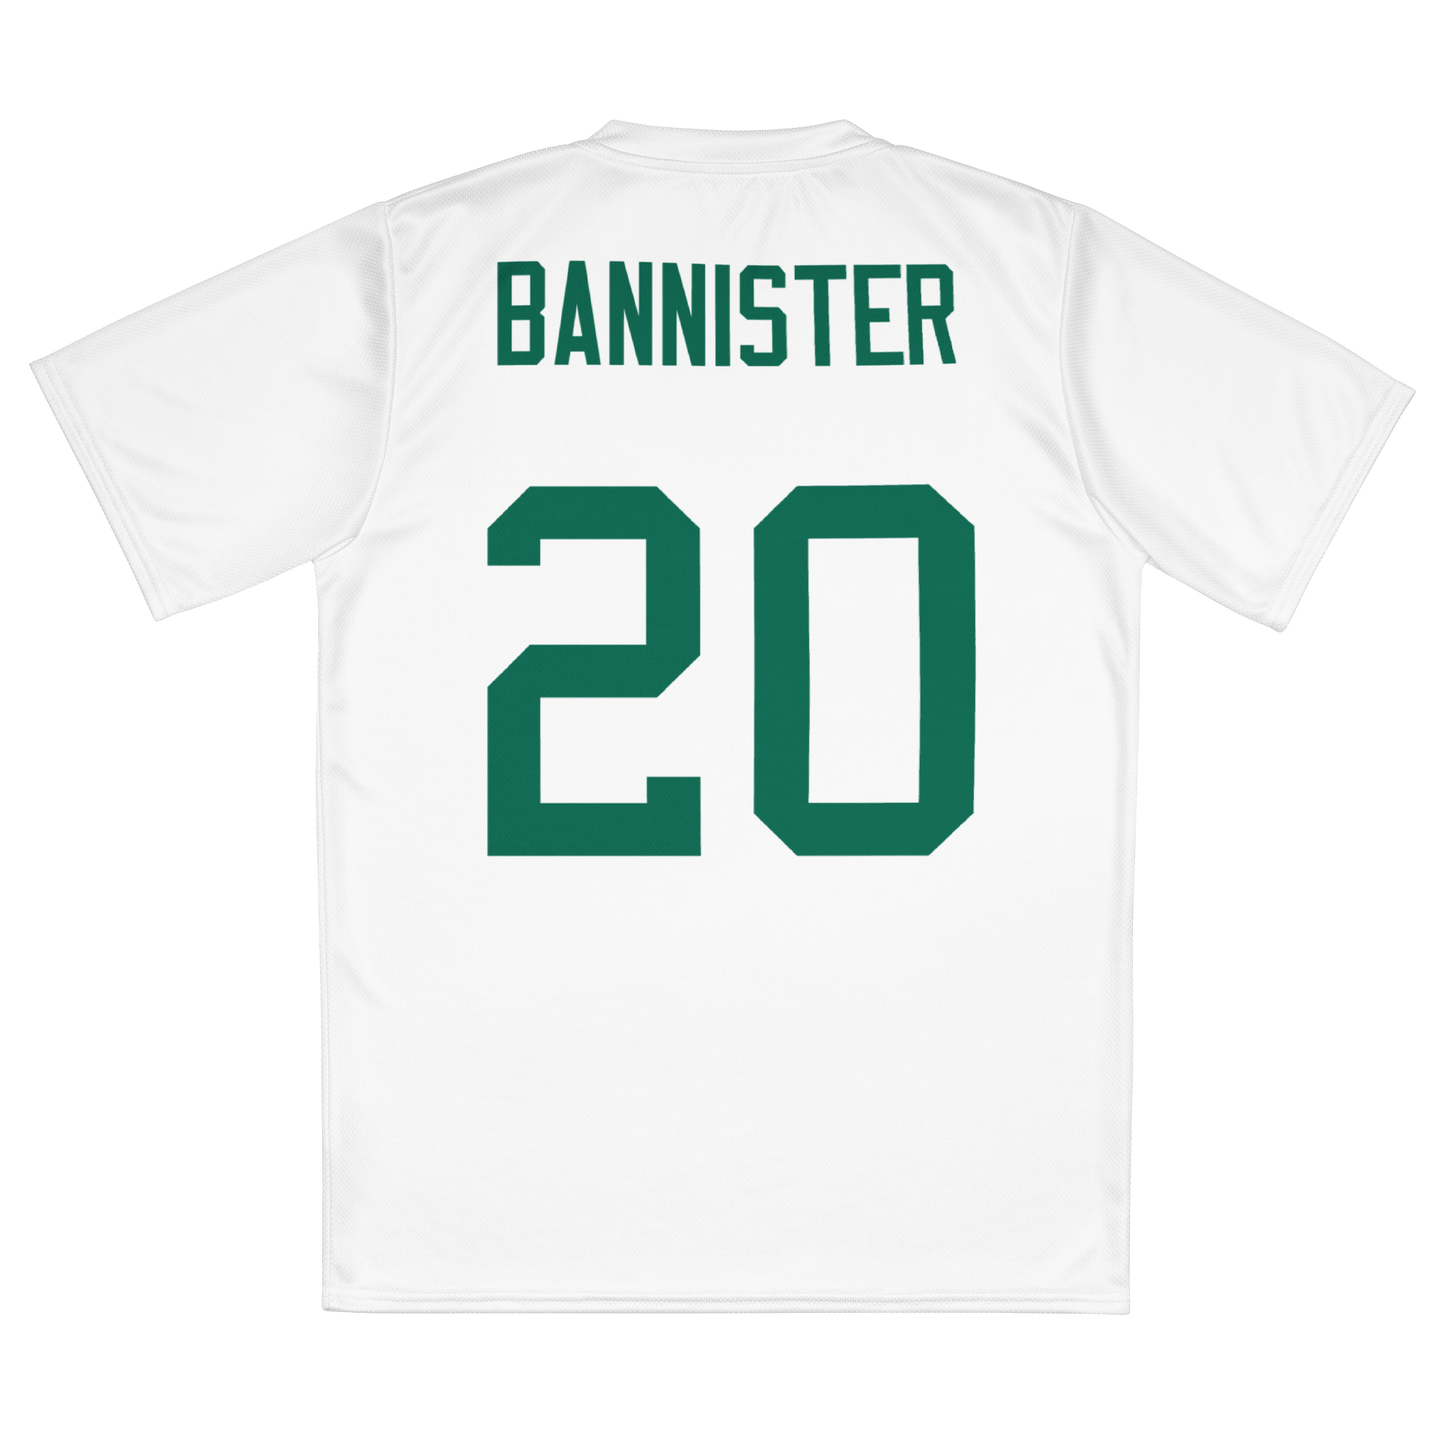 BANNISTER AWAY SHIRTSY